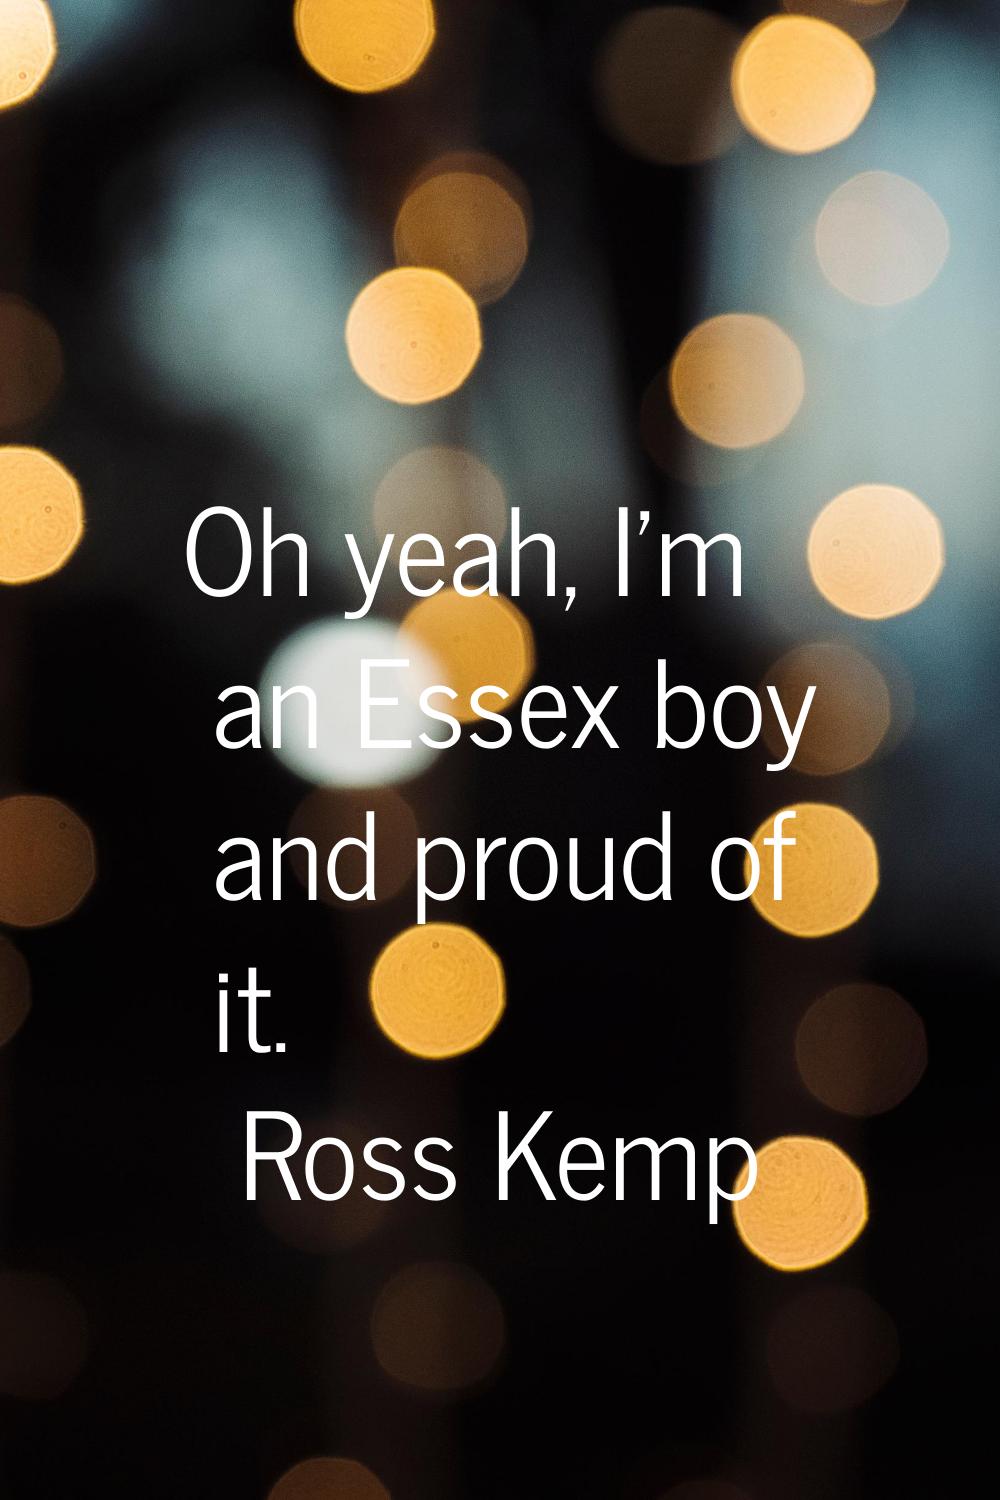 Oh yeah, I'm an Essex boy and proud of it.